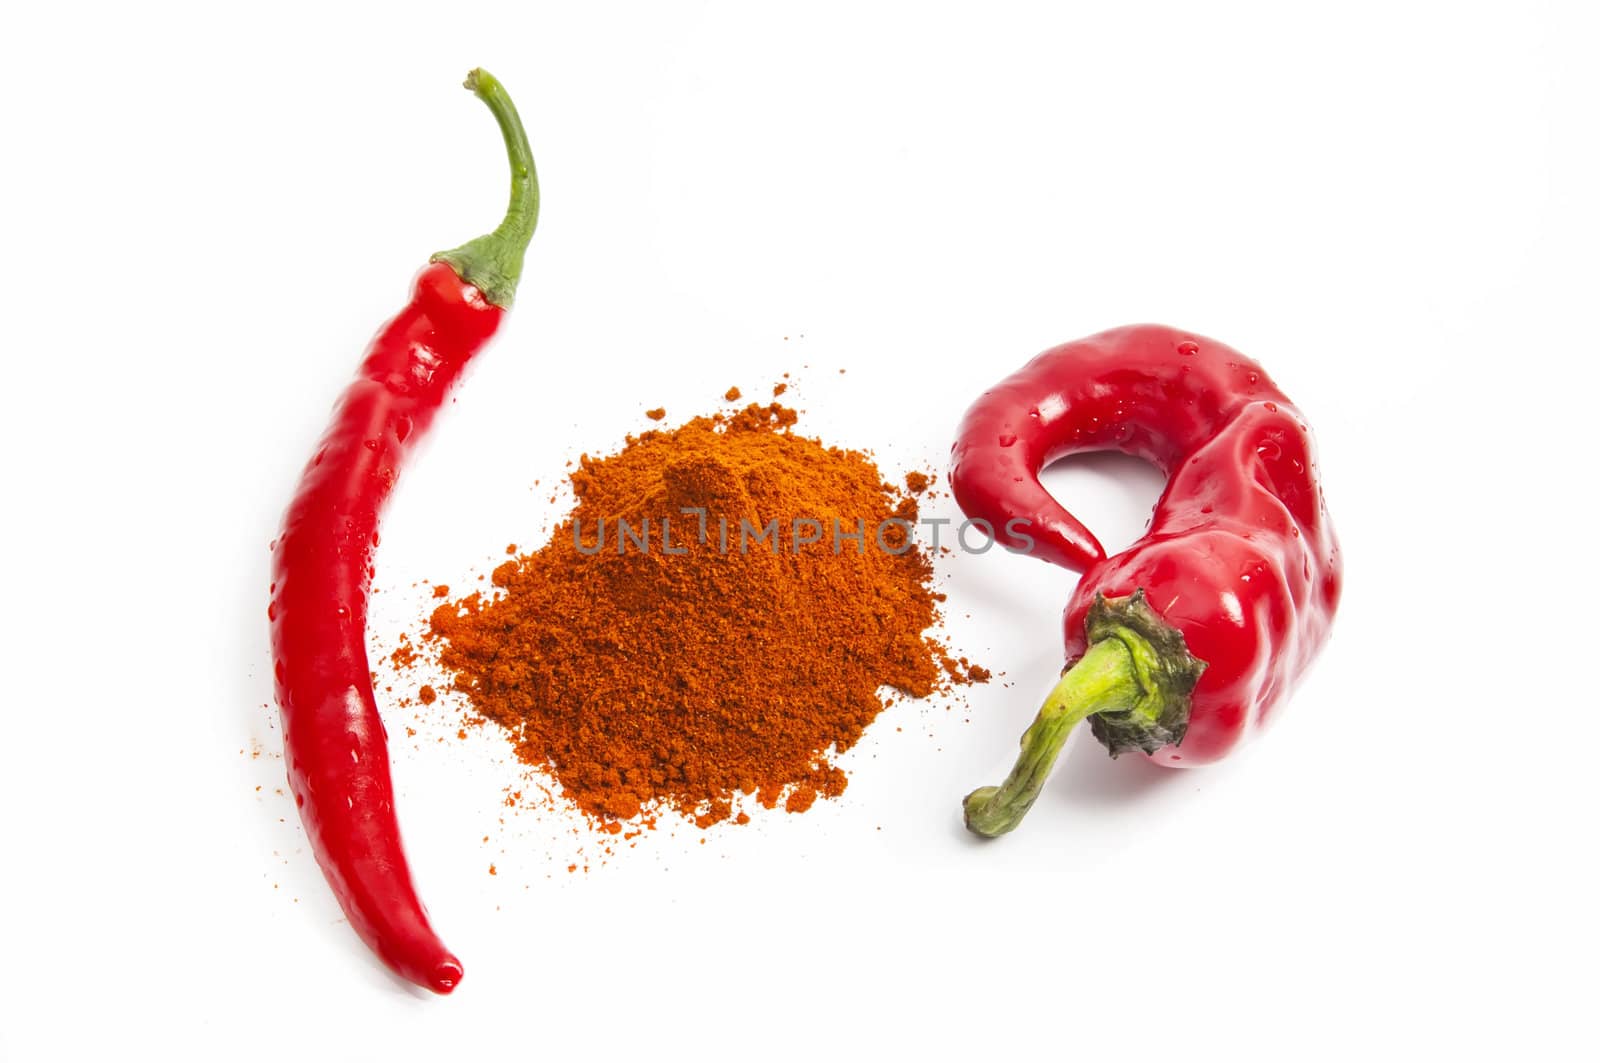 Red paprika ppepper with chili peppers isolated on white